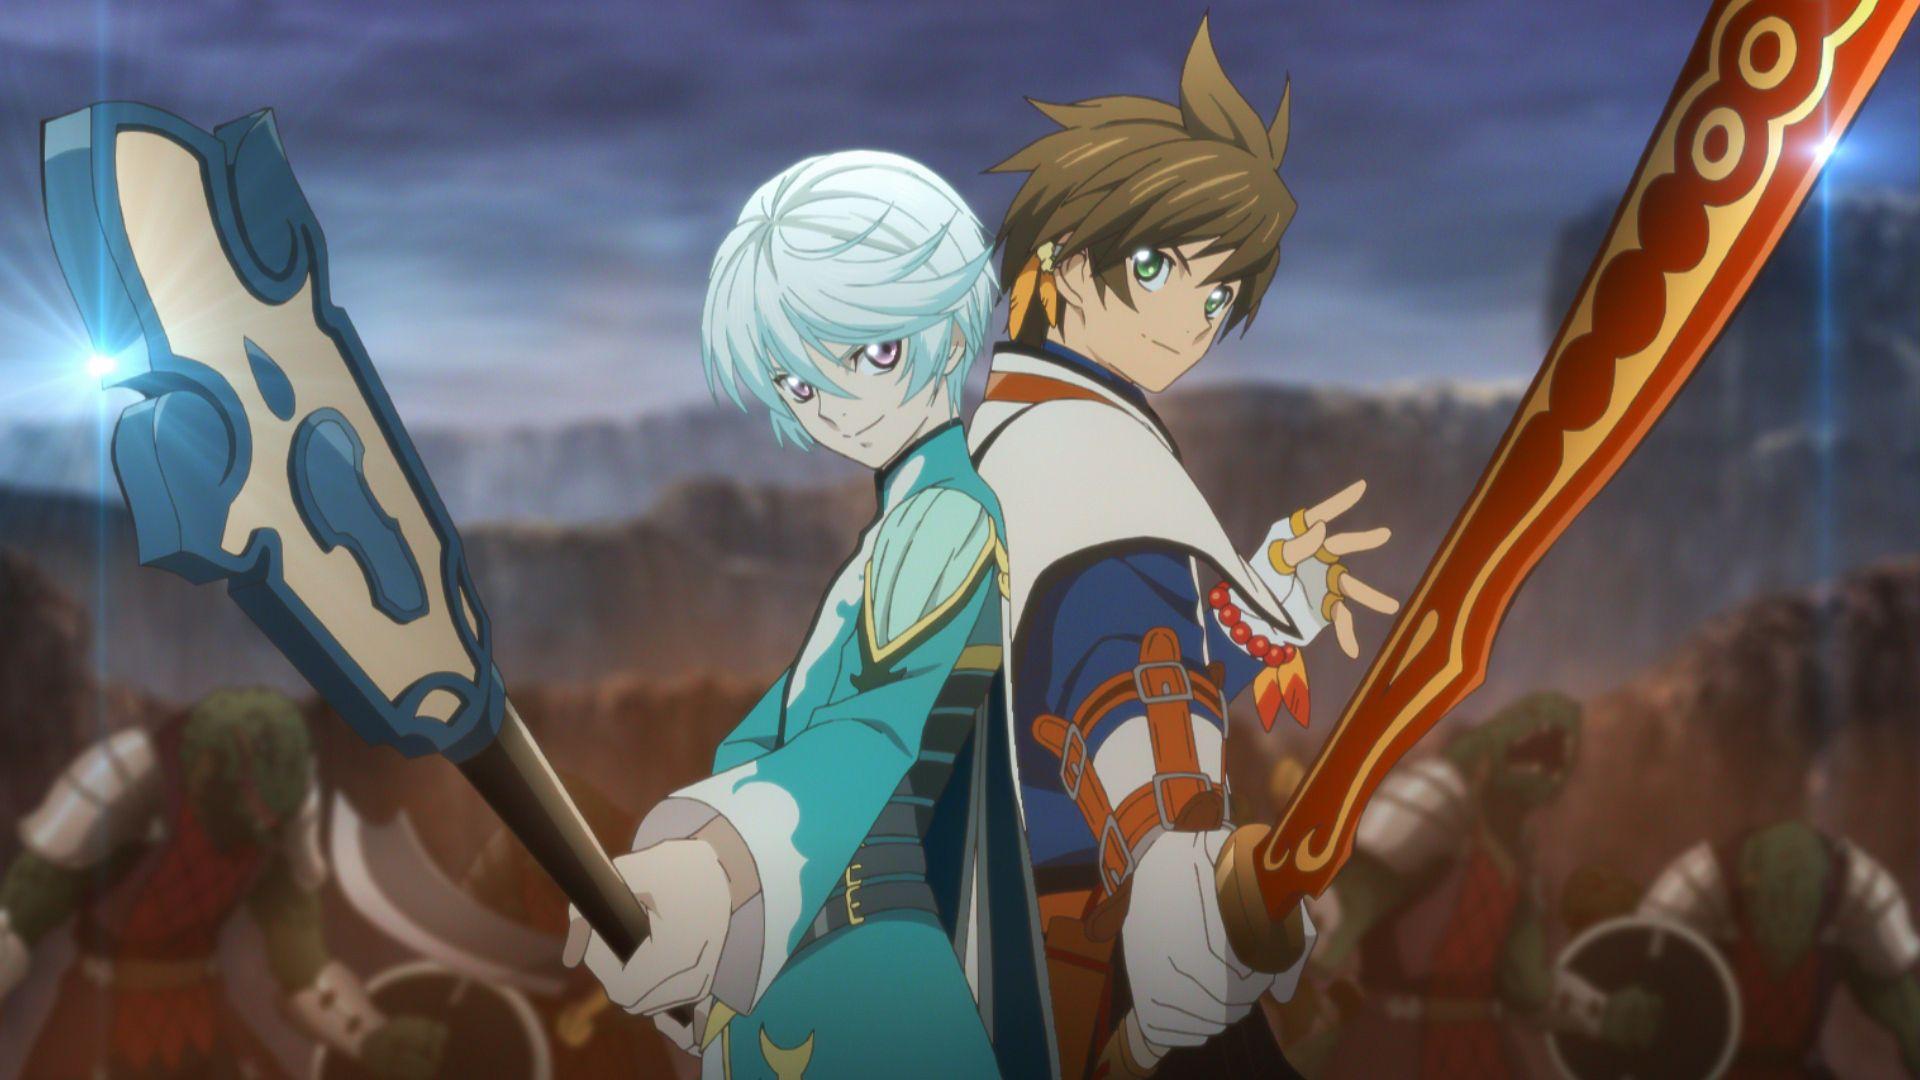 Tales of Zestiria and download on GamersGate